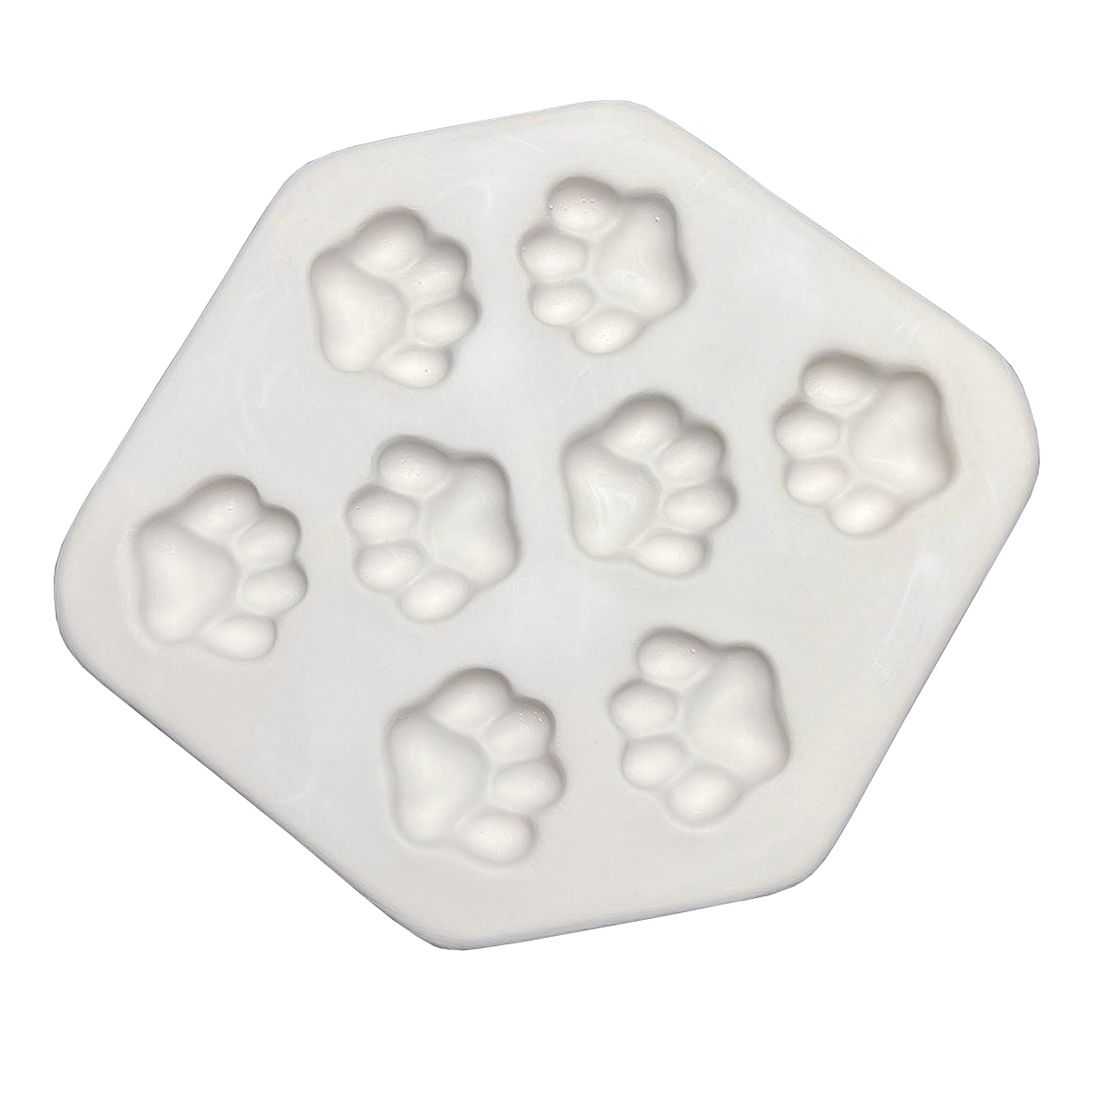 8 PAW PRINT CASTING MOLD by CPI